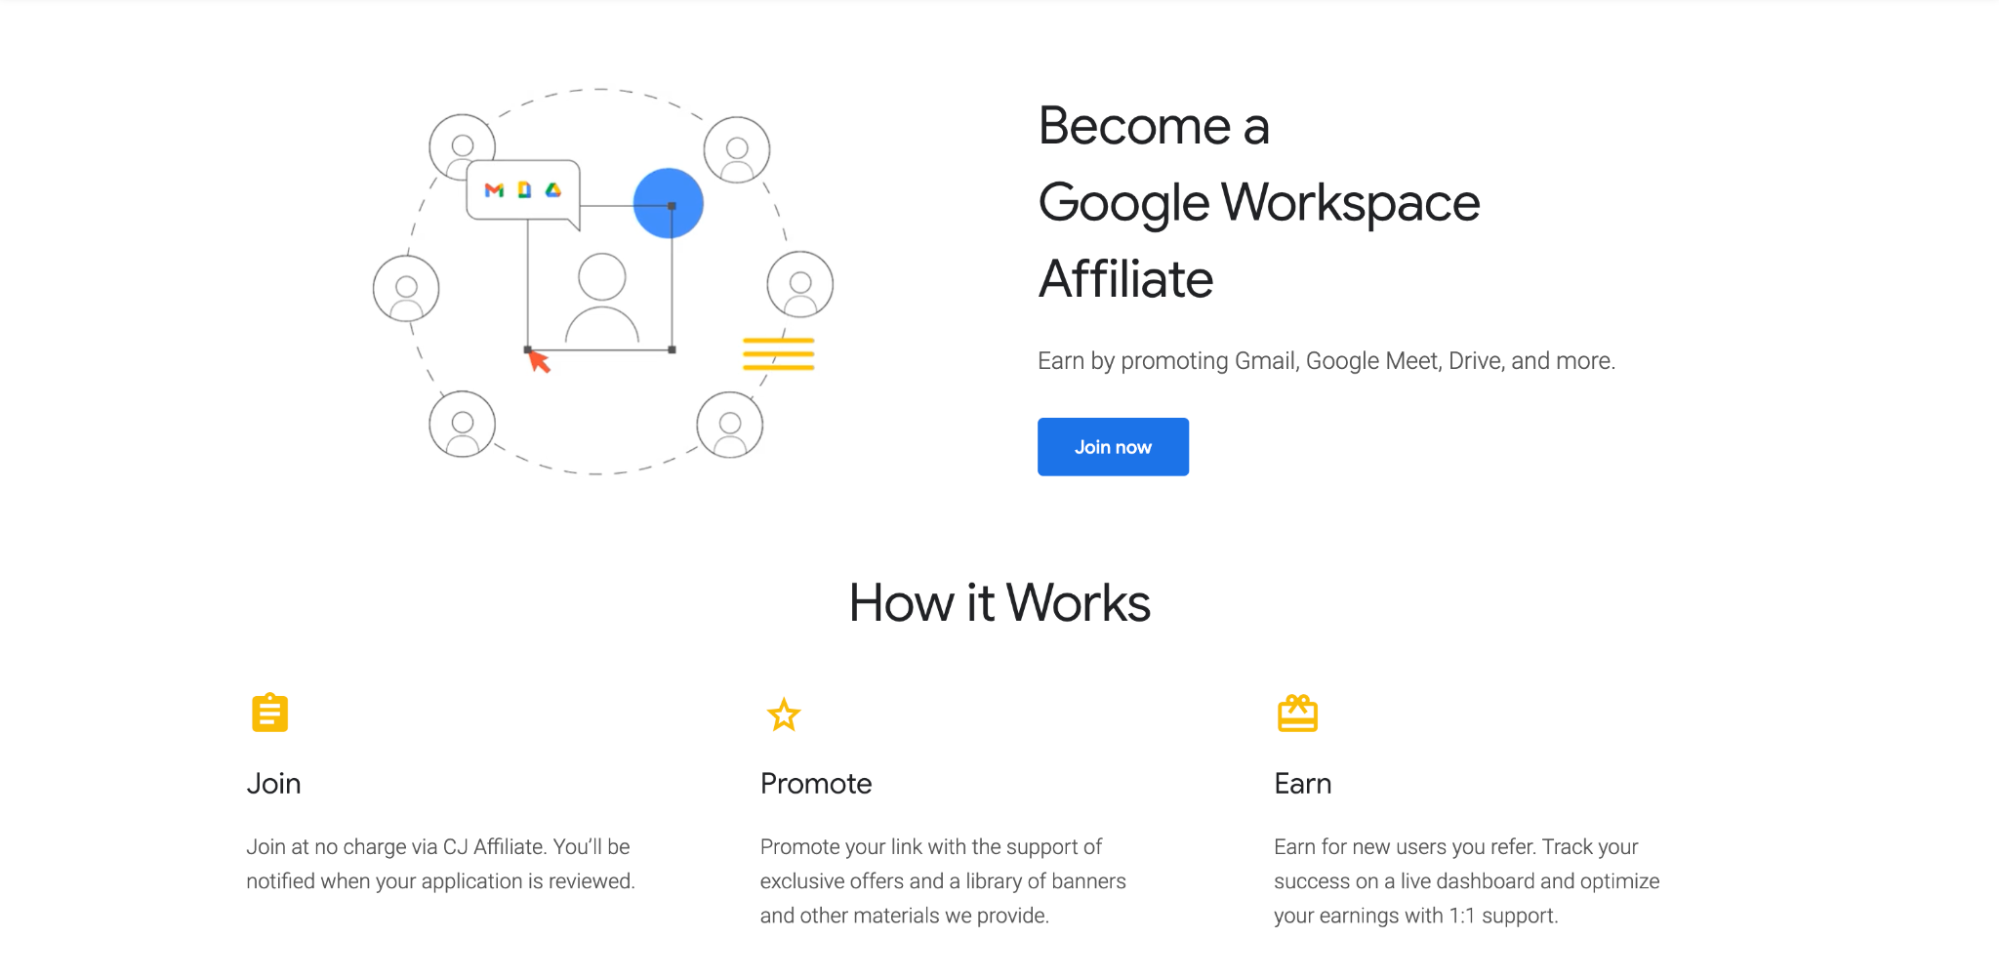 The Google Workspace affiliate sign up page with an illustration of Google’s portfolio of apps.